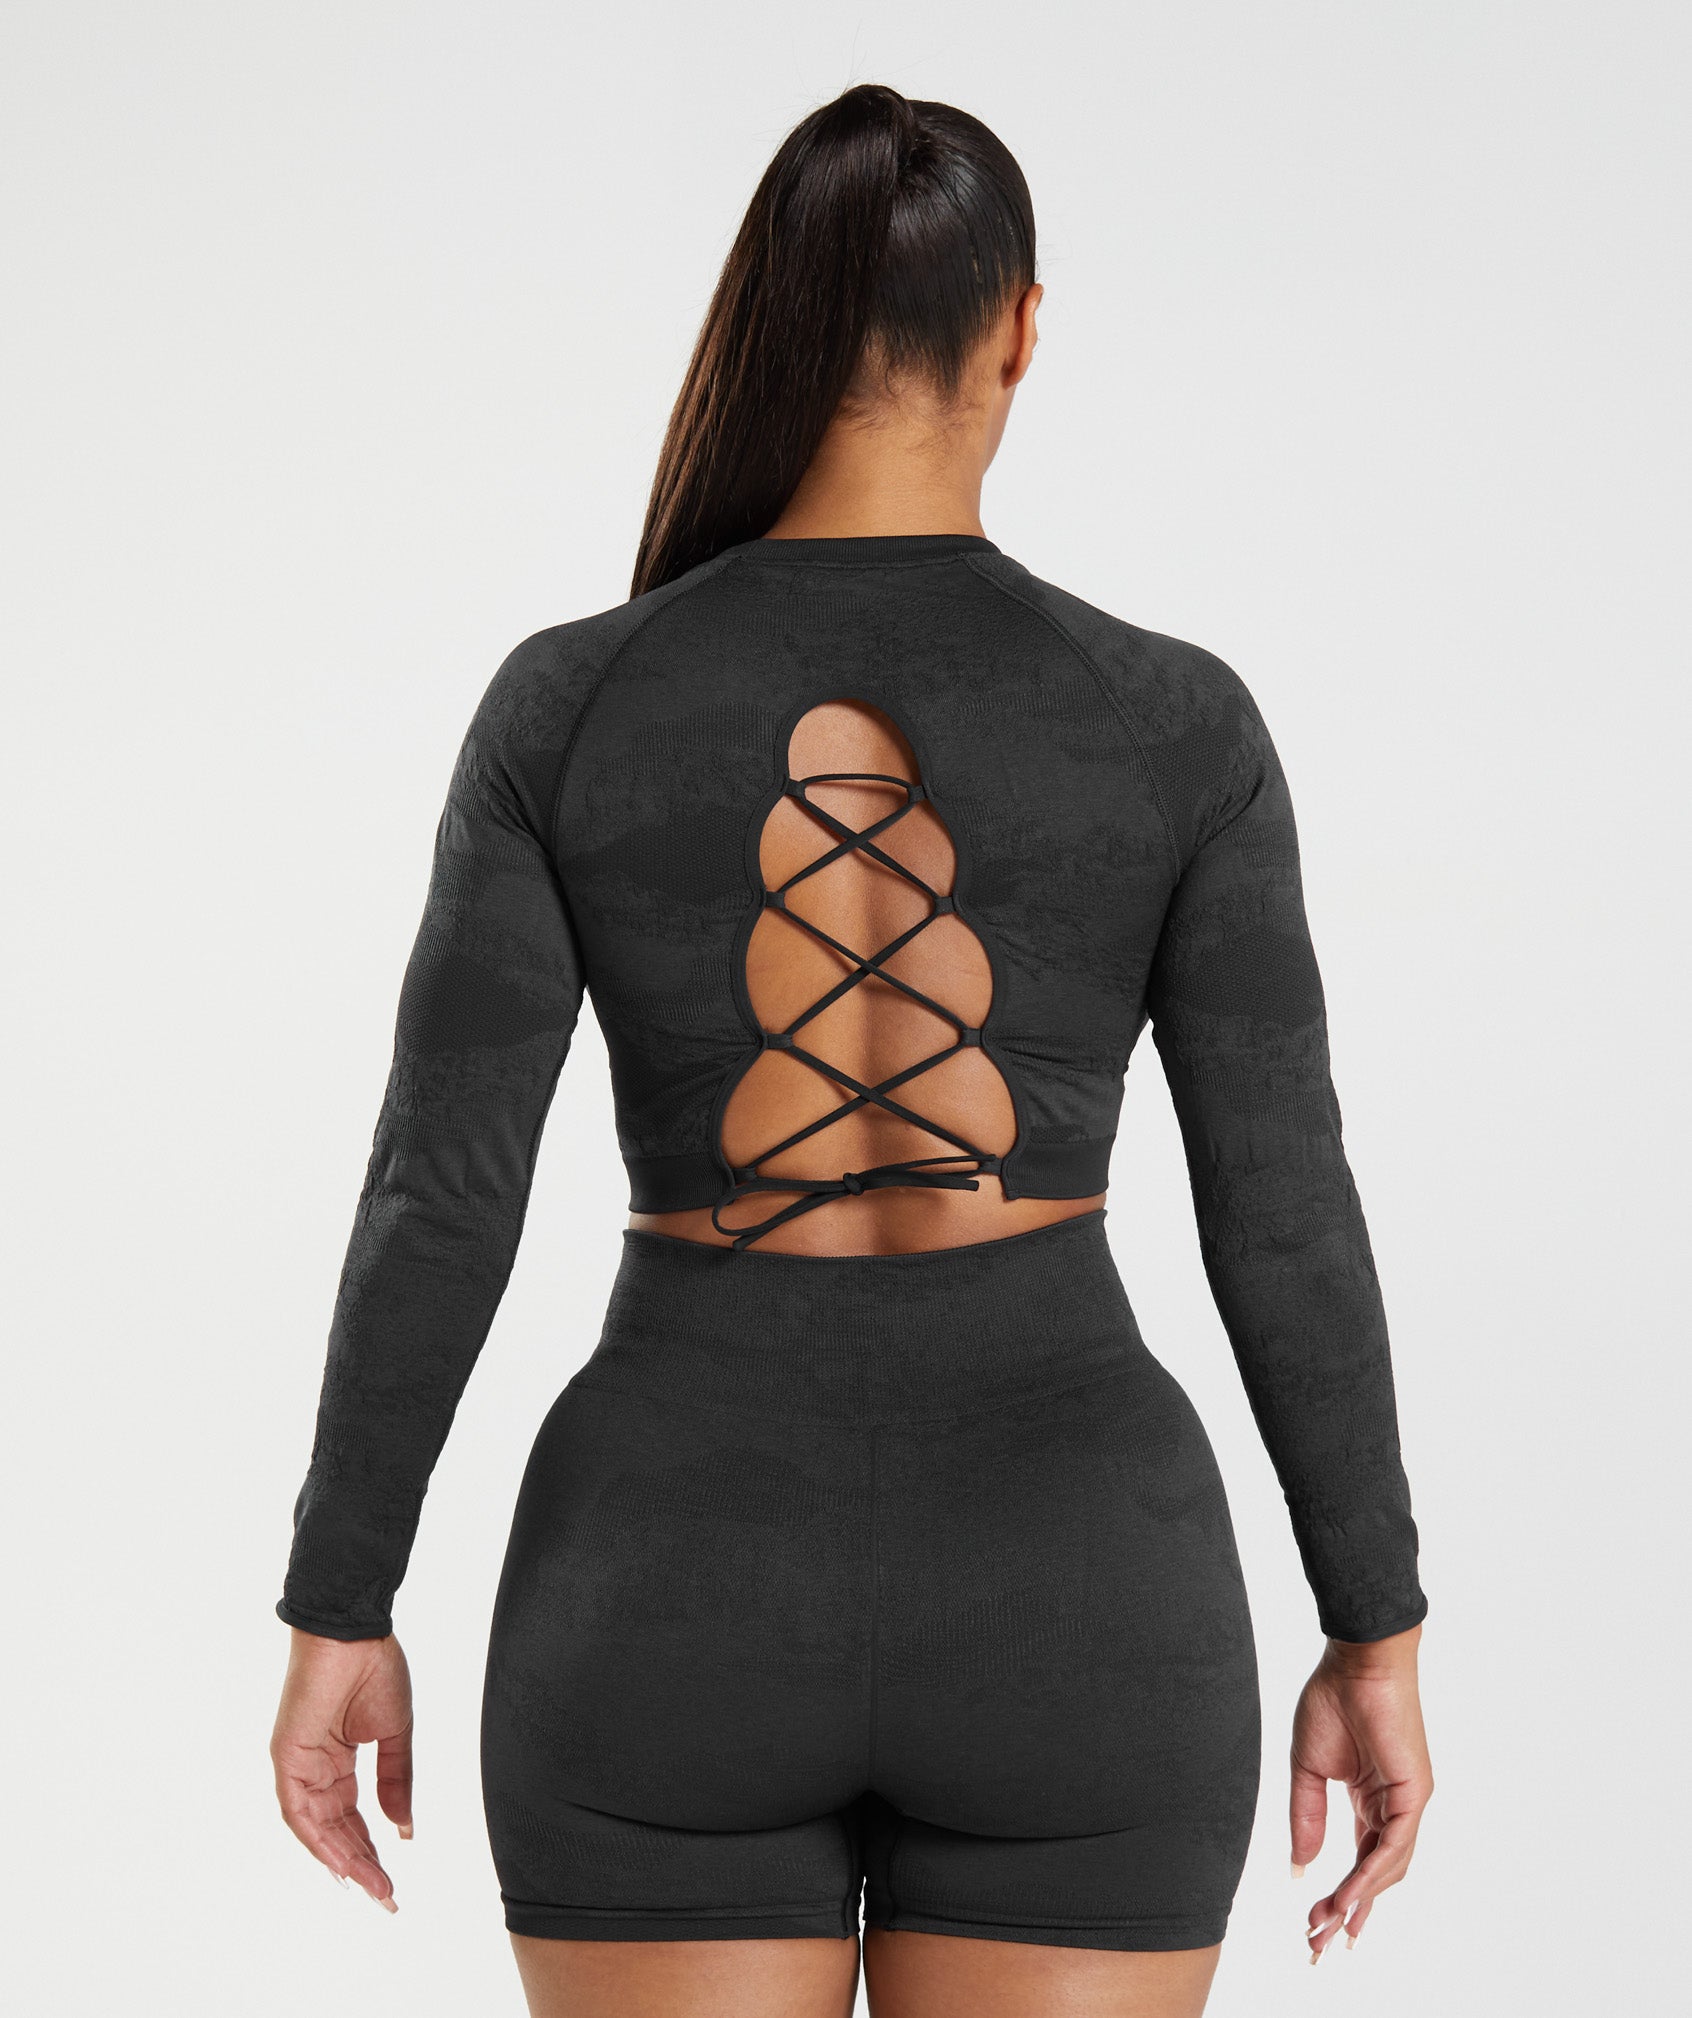 Gymshark Adapt Camo Seamless Lace Up Back Top - Storm Red/Cherry Brown